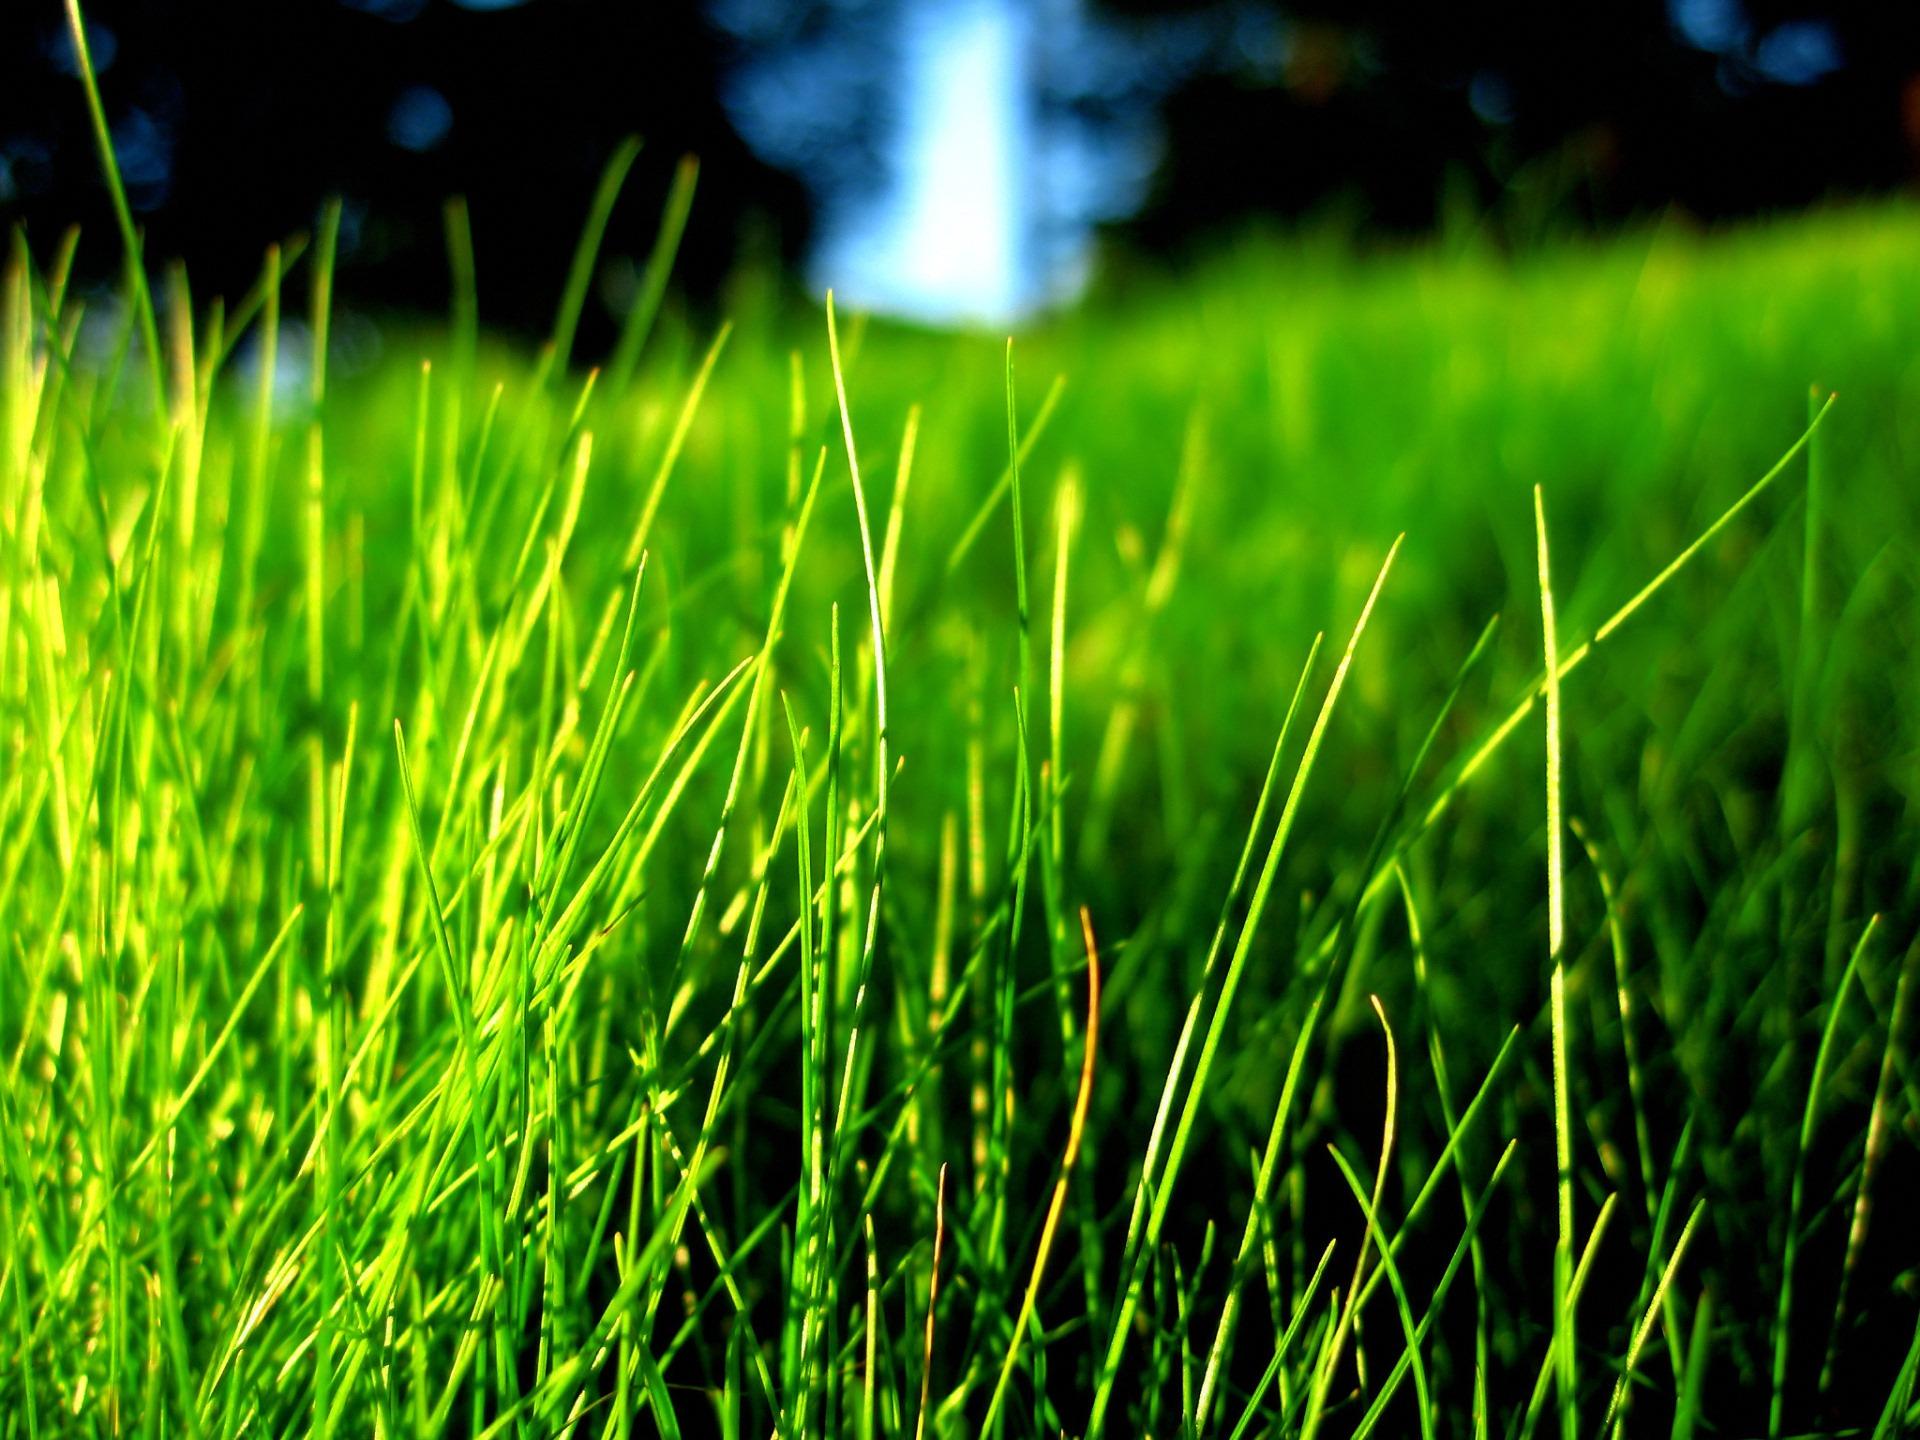 Grass Wallpaper Plants Nature Wallpaper in jpg format for free download